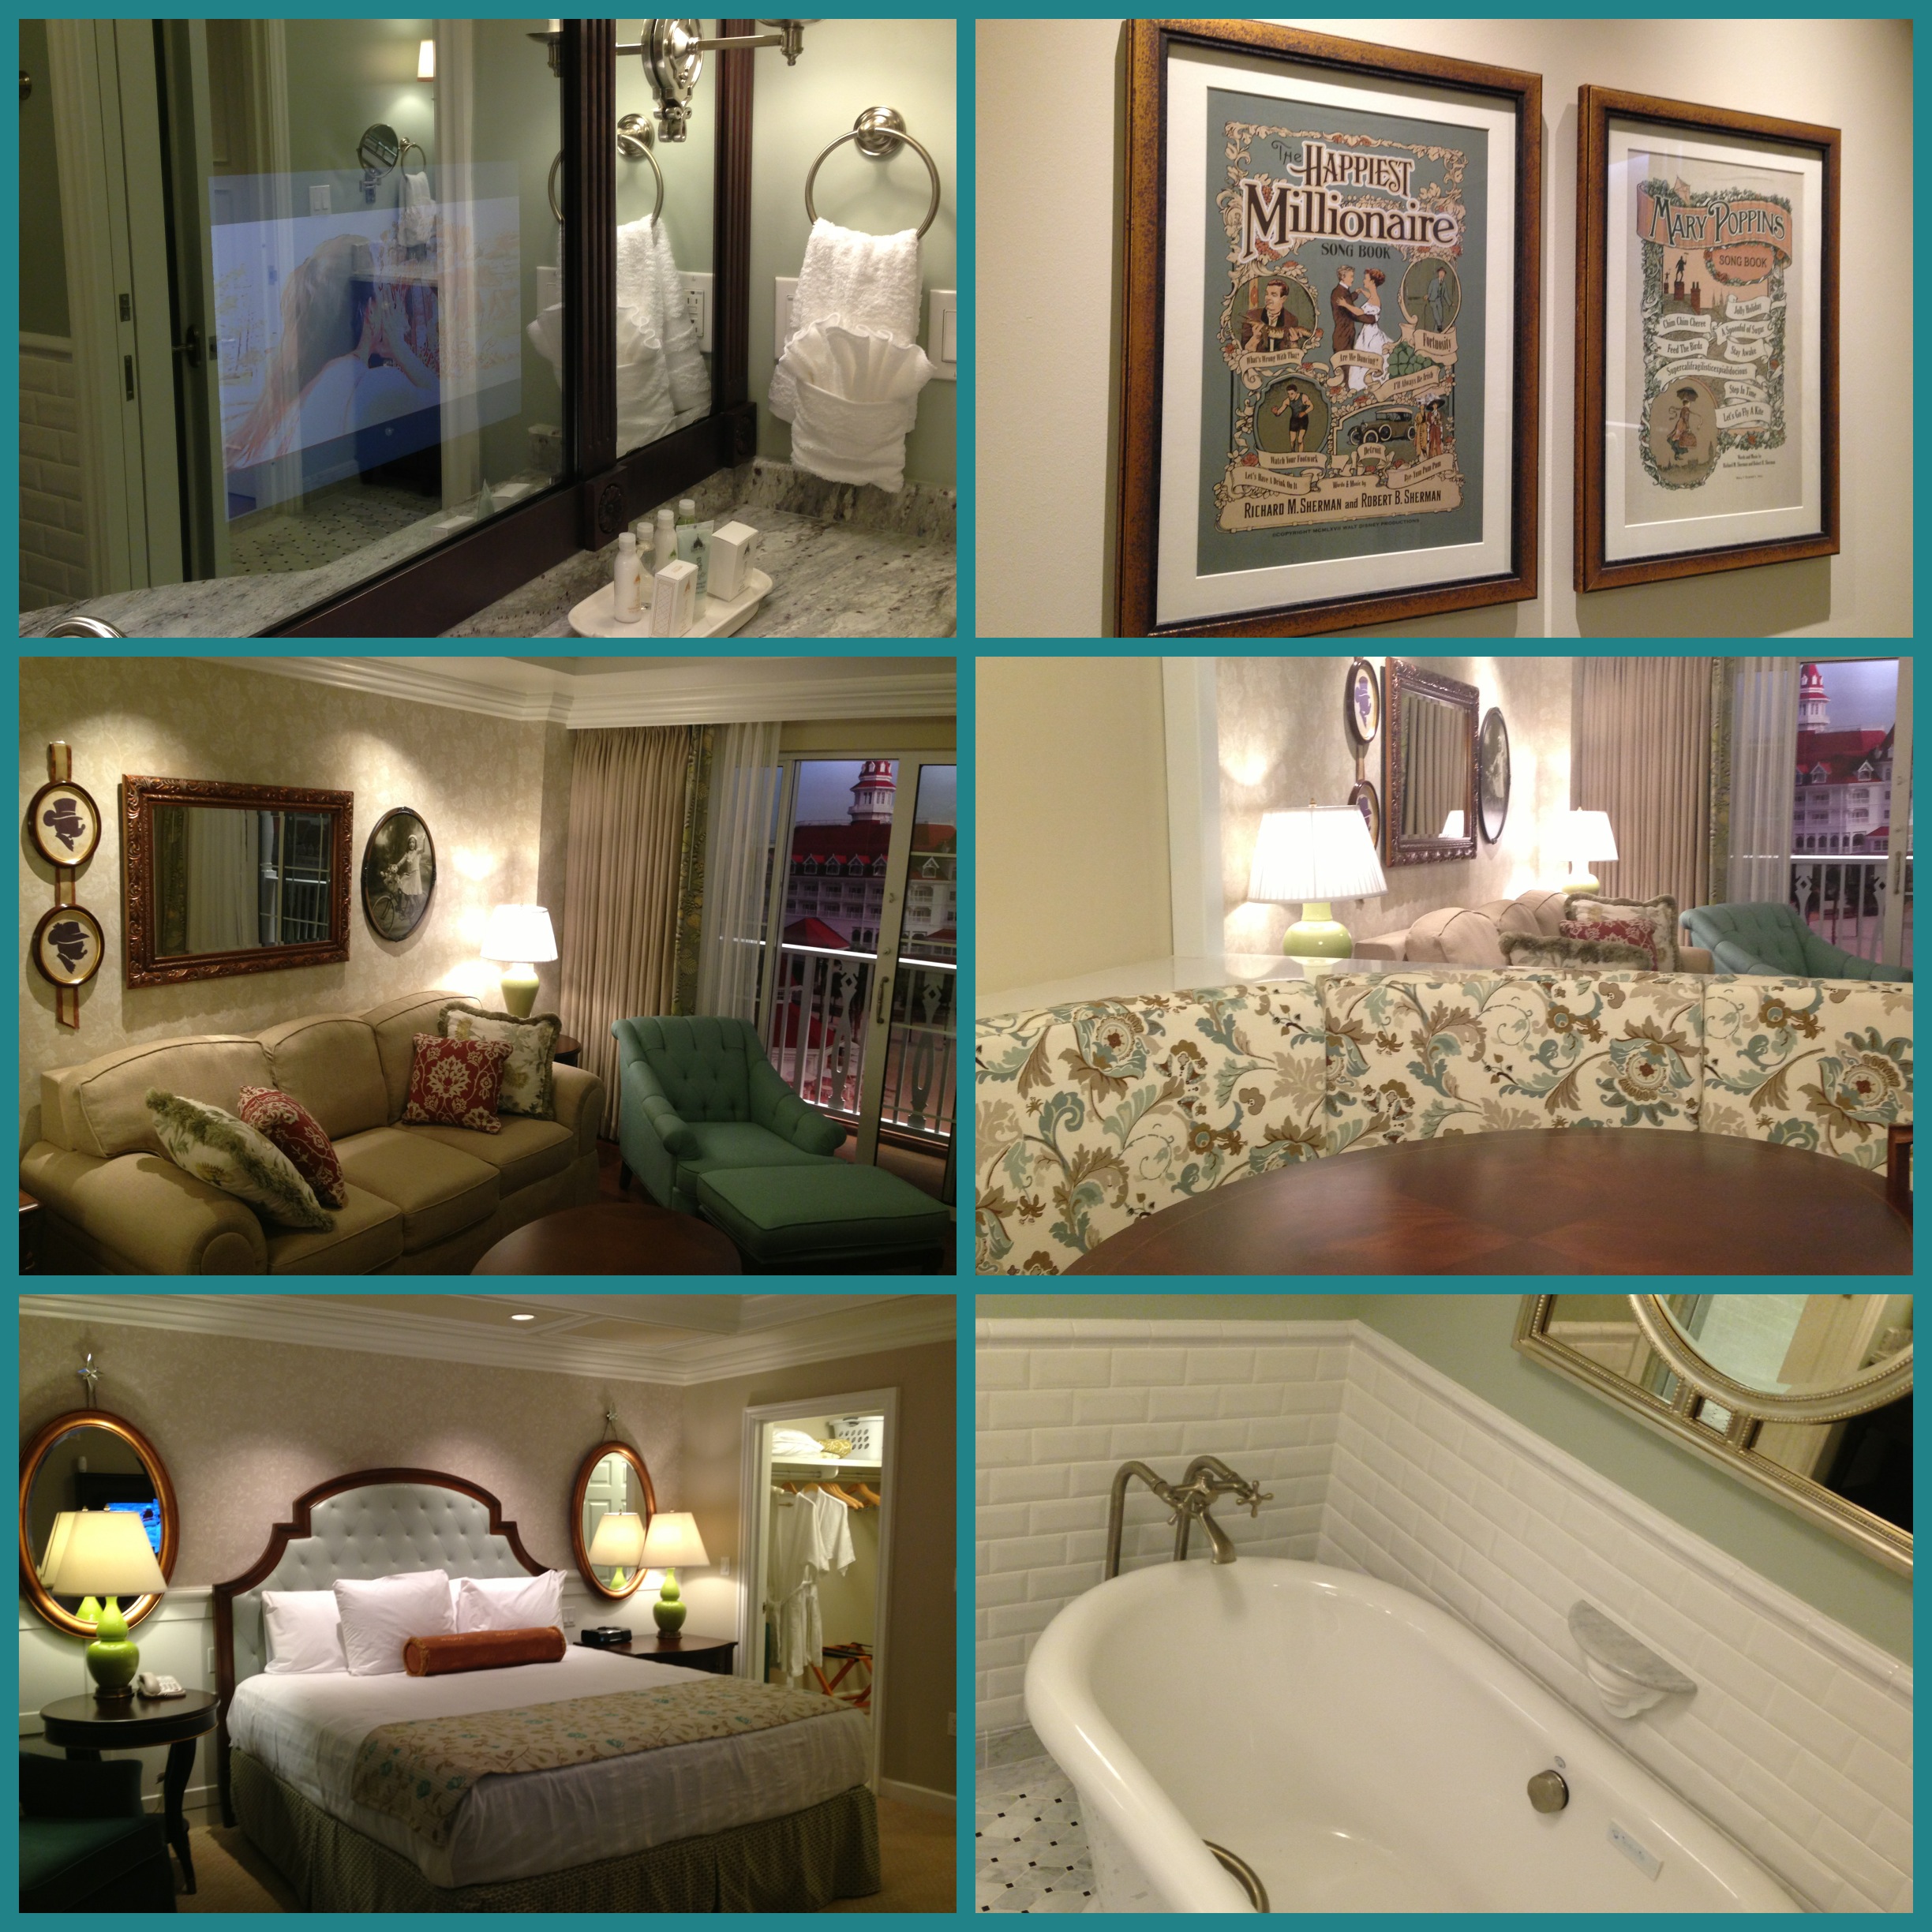 The Villas at the Grand Floridian Resort and Spa